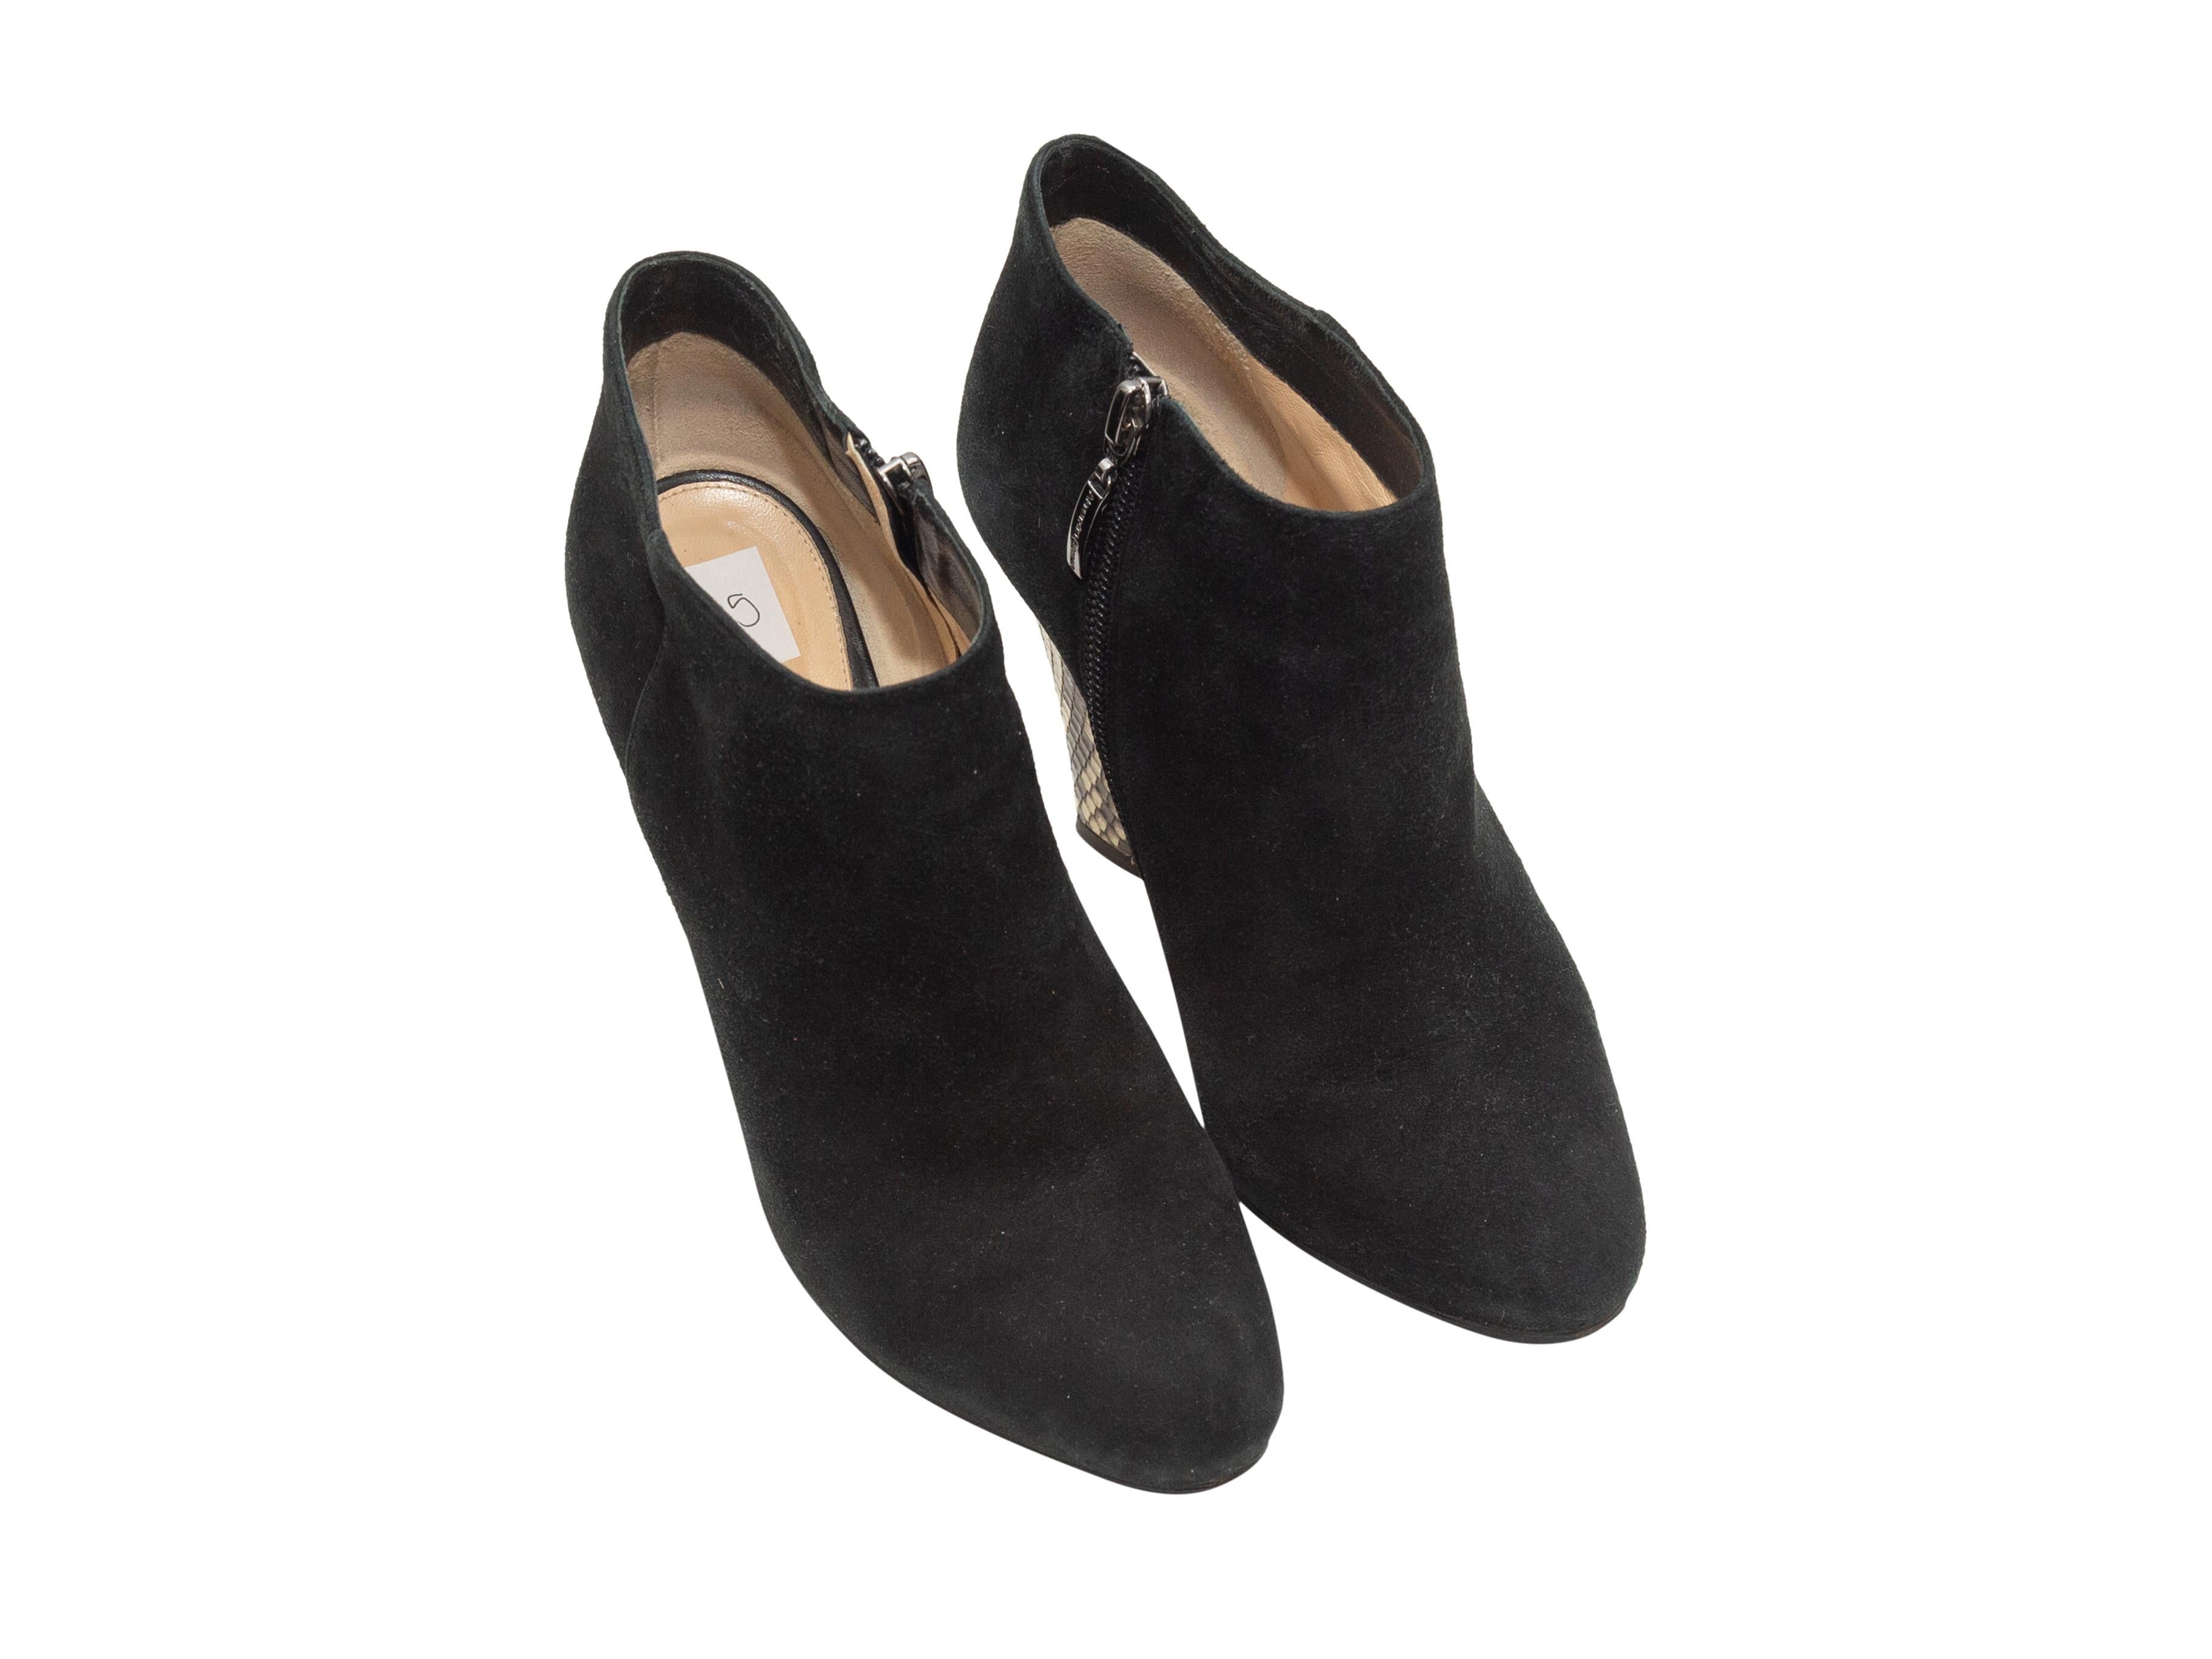 Product details: Black suede and snakeskin booties by Alexandre Birman. Zip closures at inner sides. 3.5